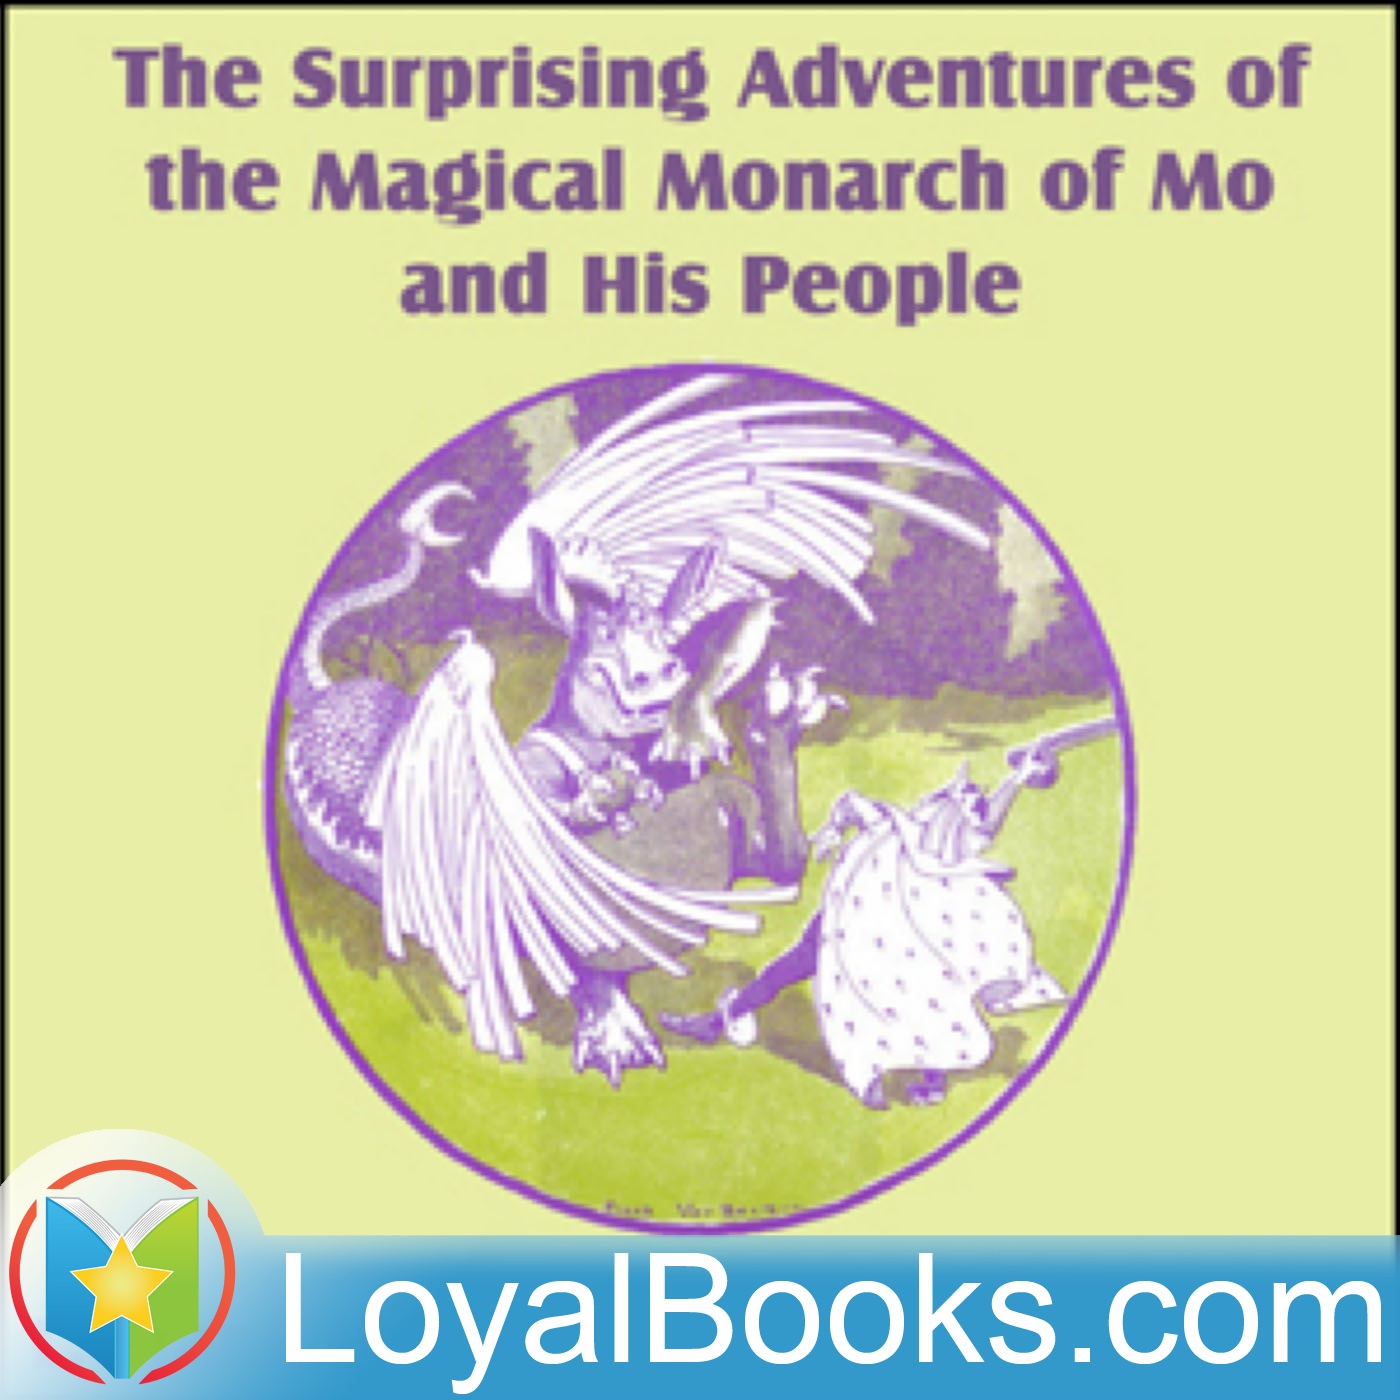 The Surprising Adventures of the Magical Monarch of Mo and His People by L. Frank Baum